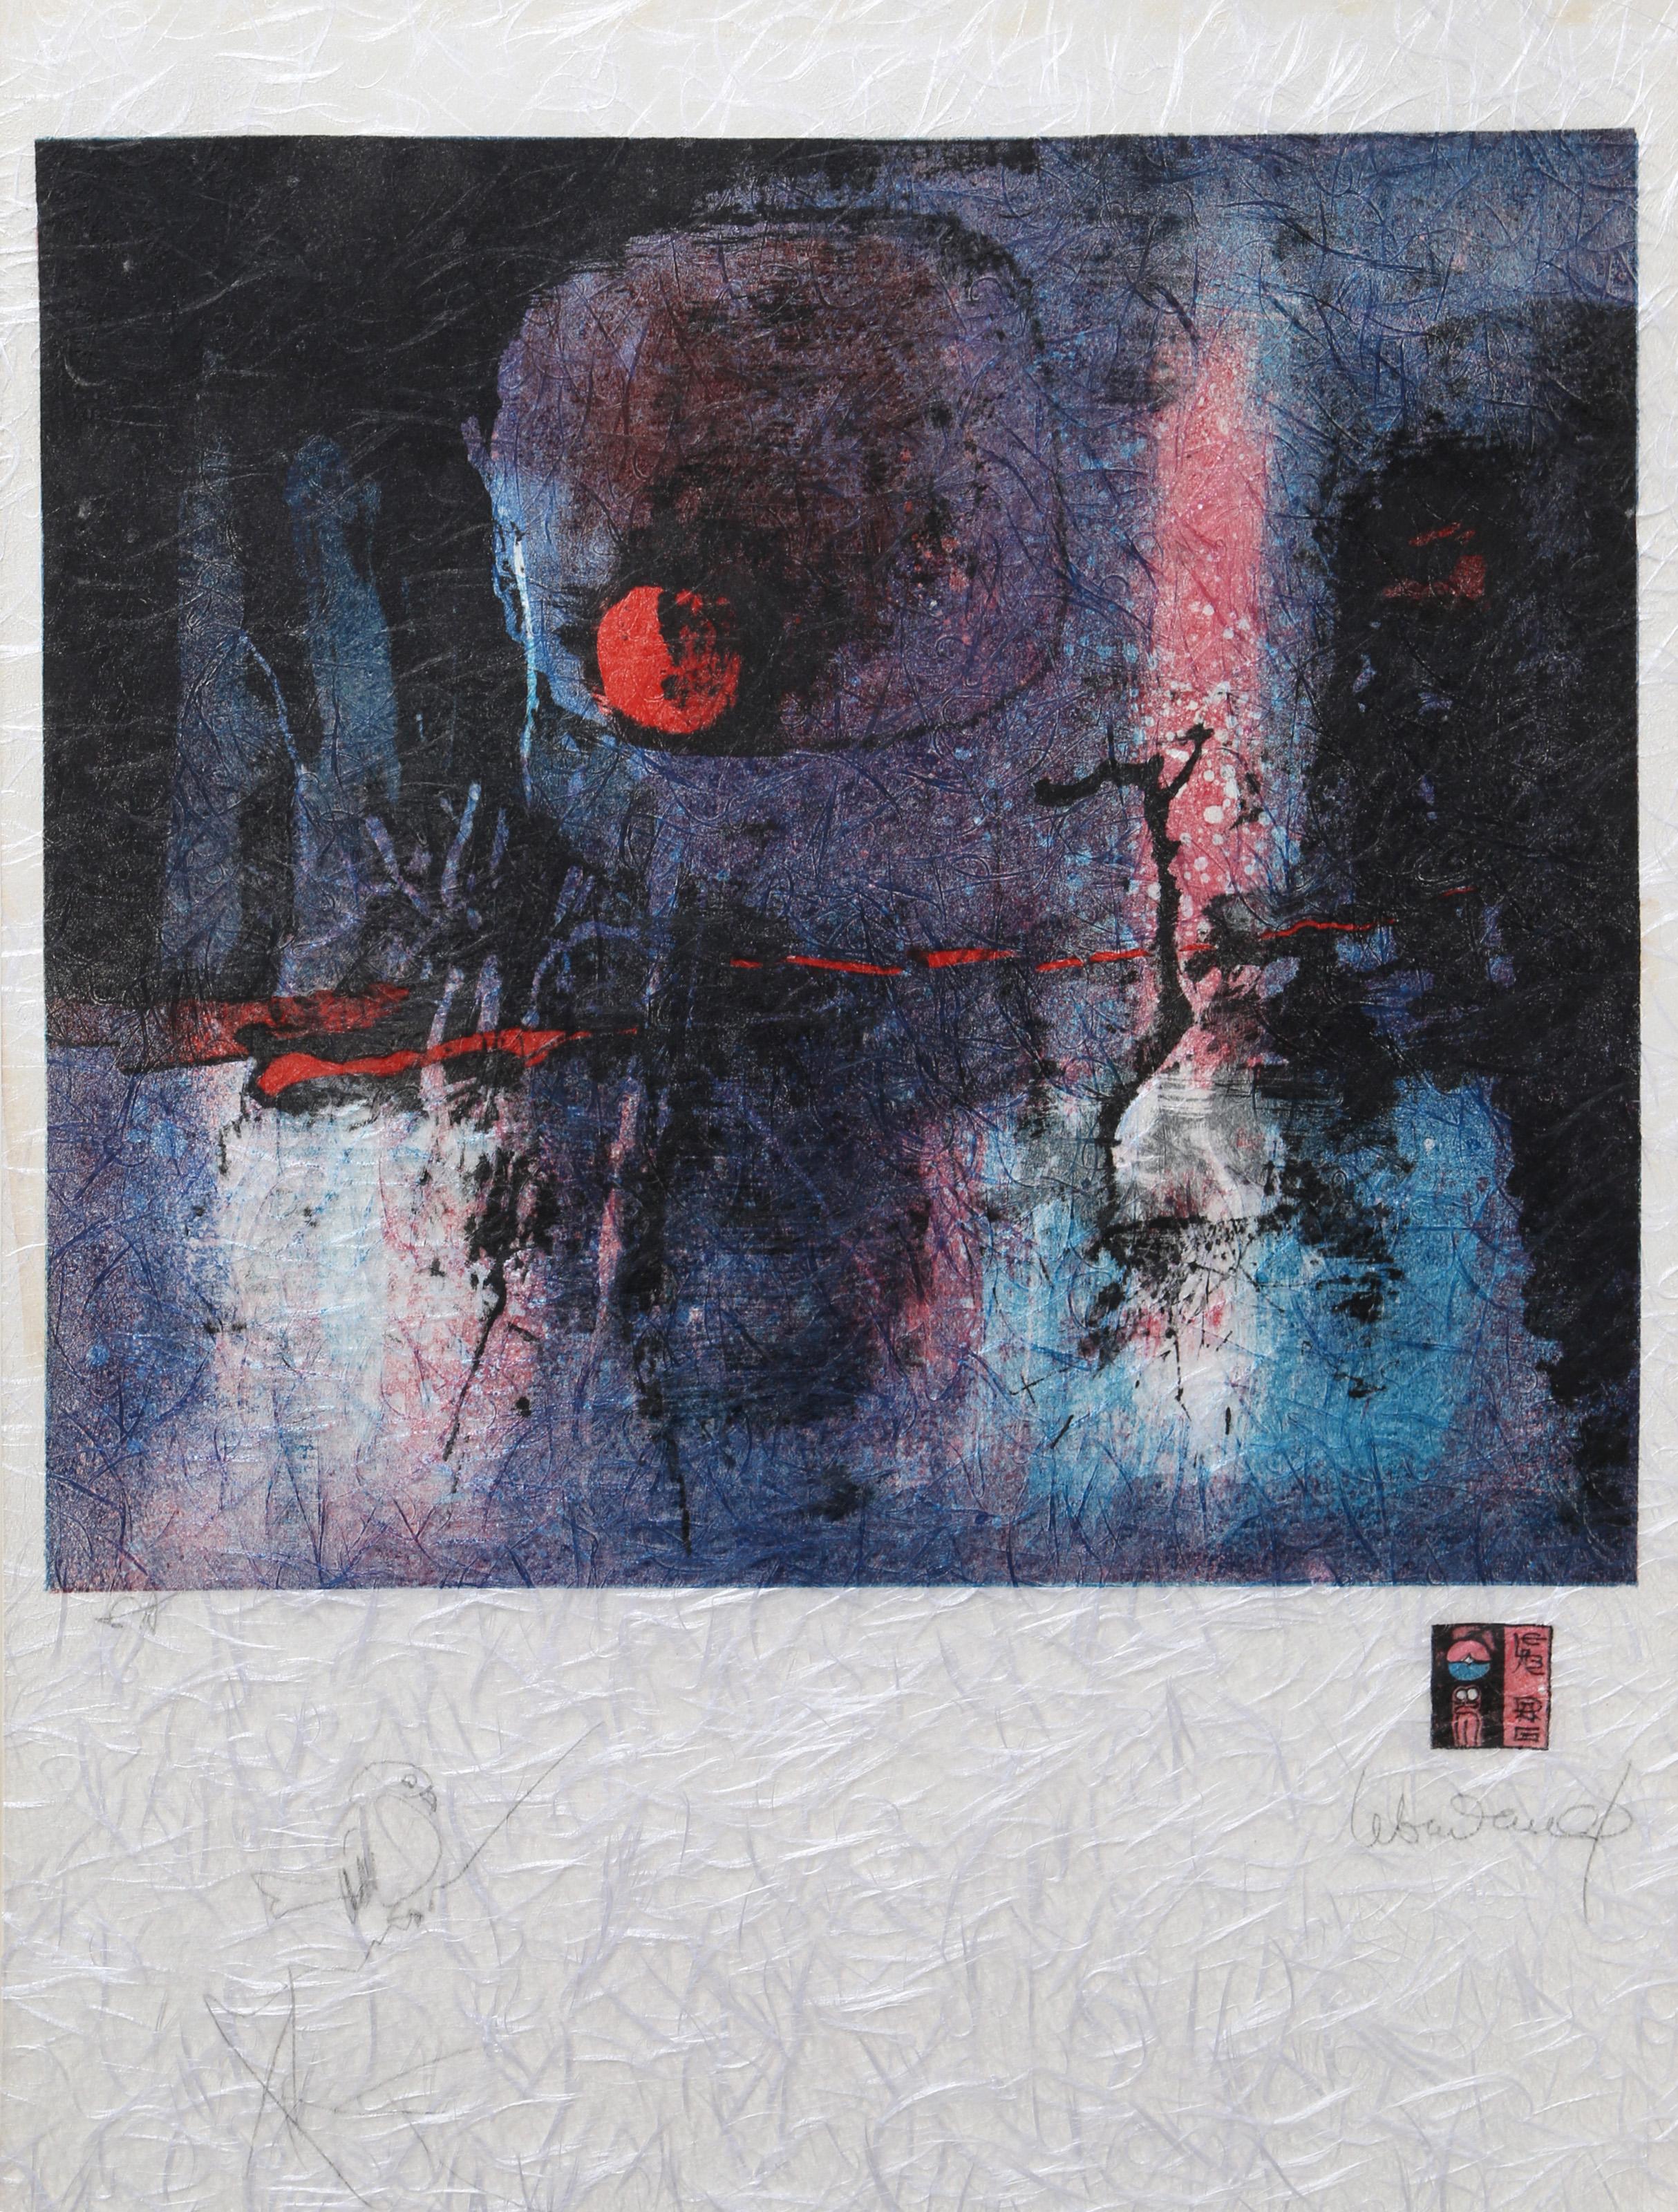 Lebadang (aka Hoi), Vietnamese (1922 - 2015) -  La Lune Mystere. Year: circa 1975, Medium: Lithograph on Japon, signed in pencil, Edition: EA, Size: 29 x 21 in. (73.66 x 53.34 cm) 